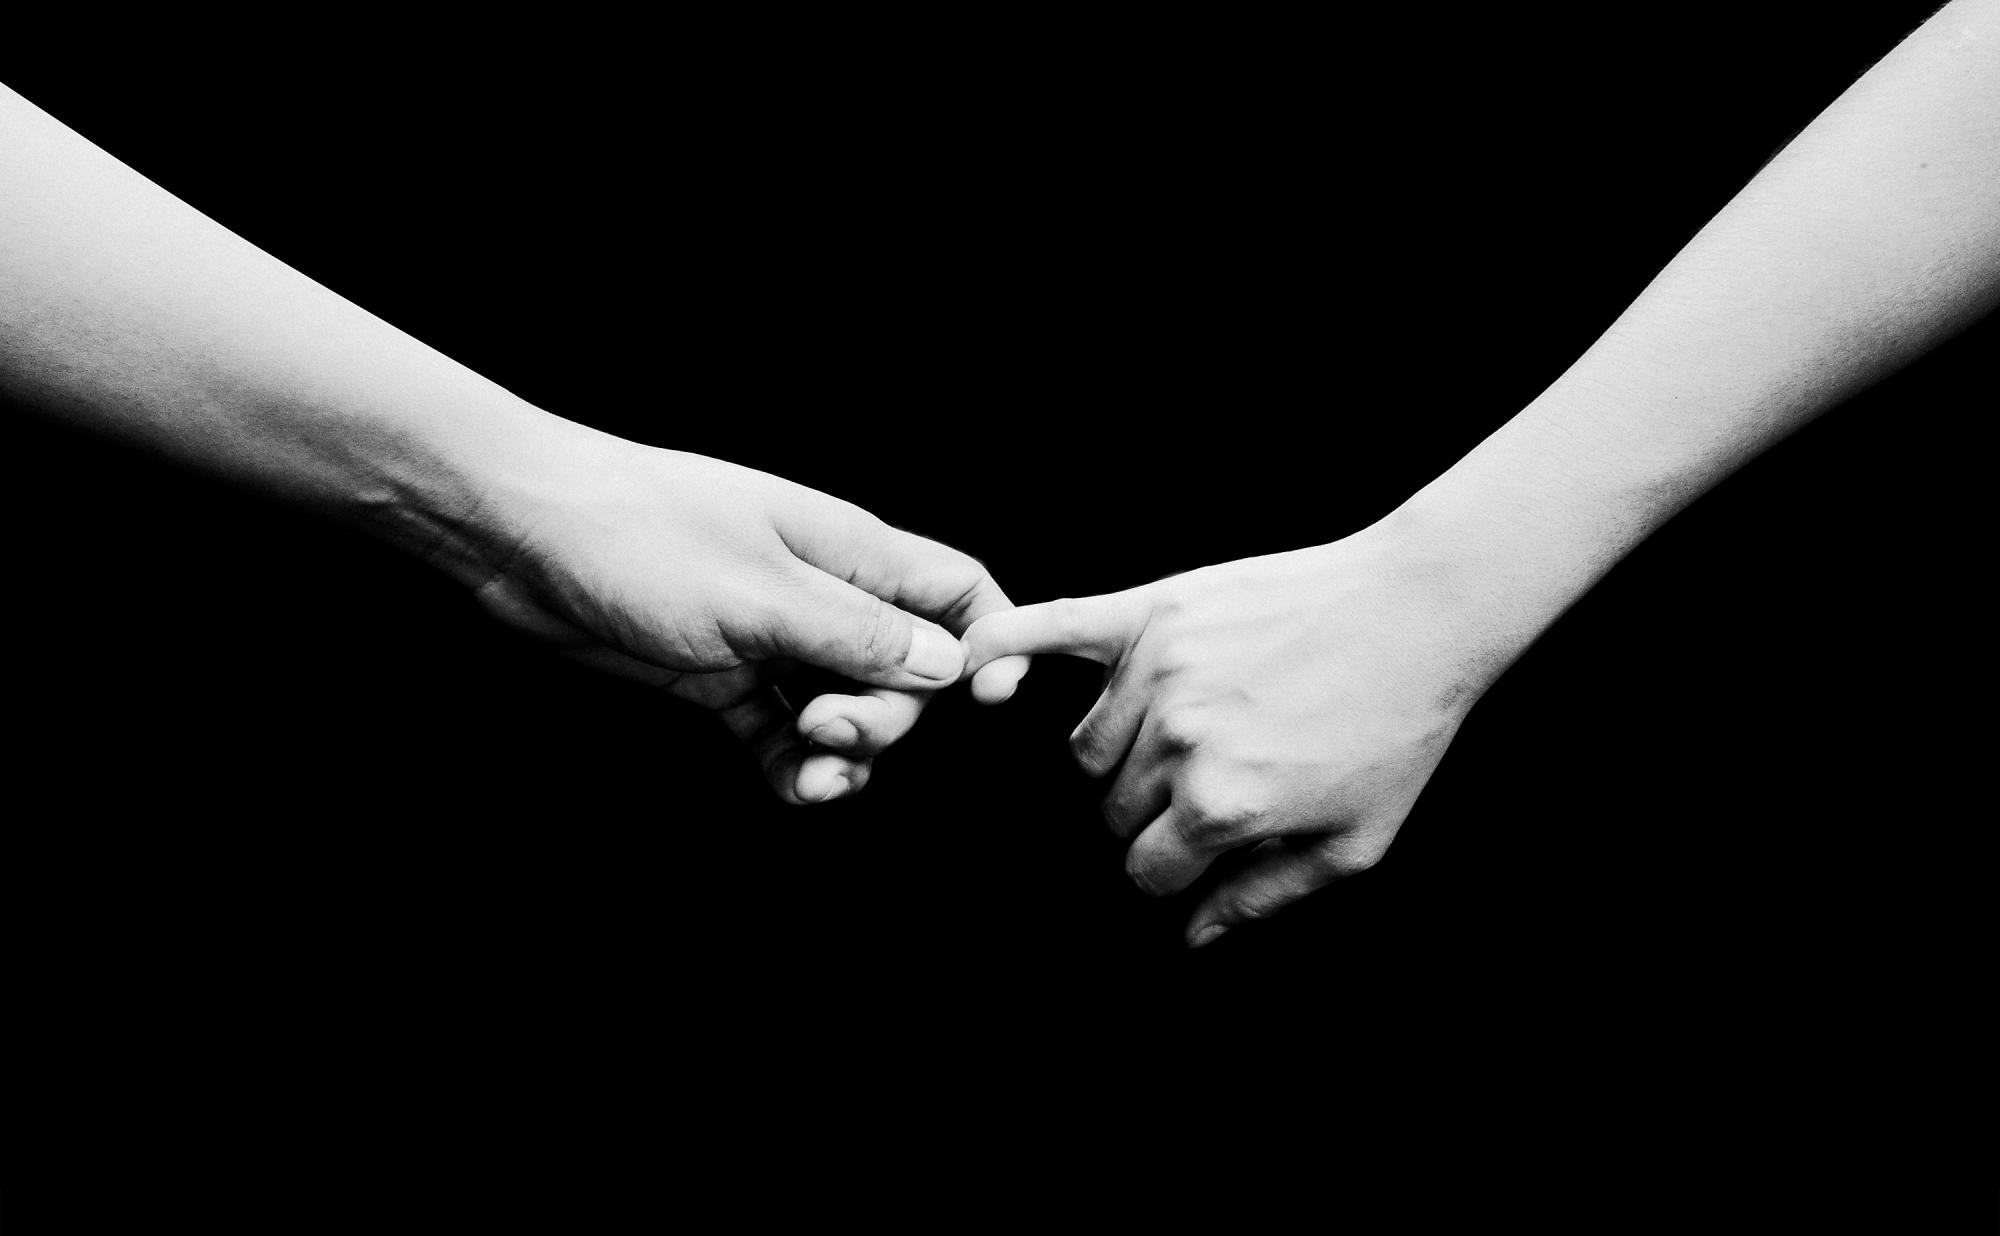 Just the two of us: Holding hands can ease pain, sync brainwaves ...